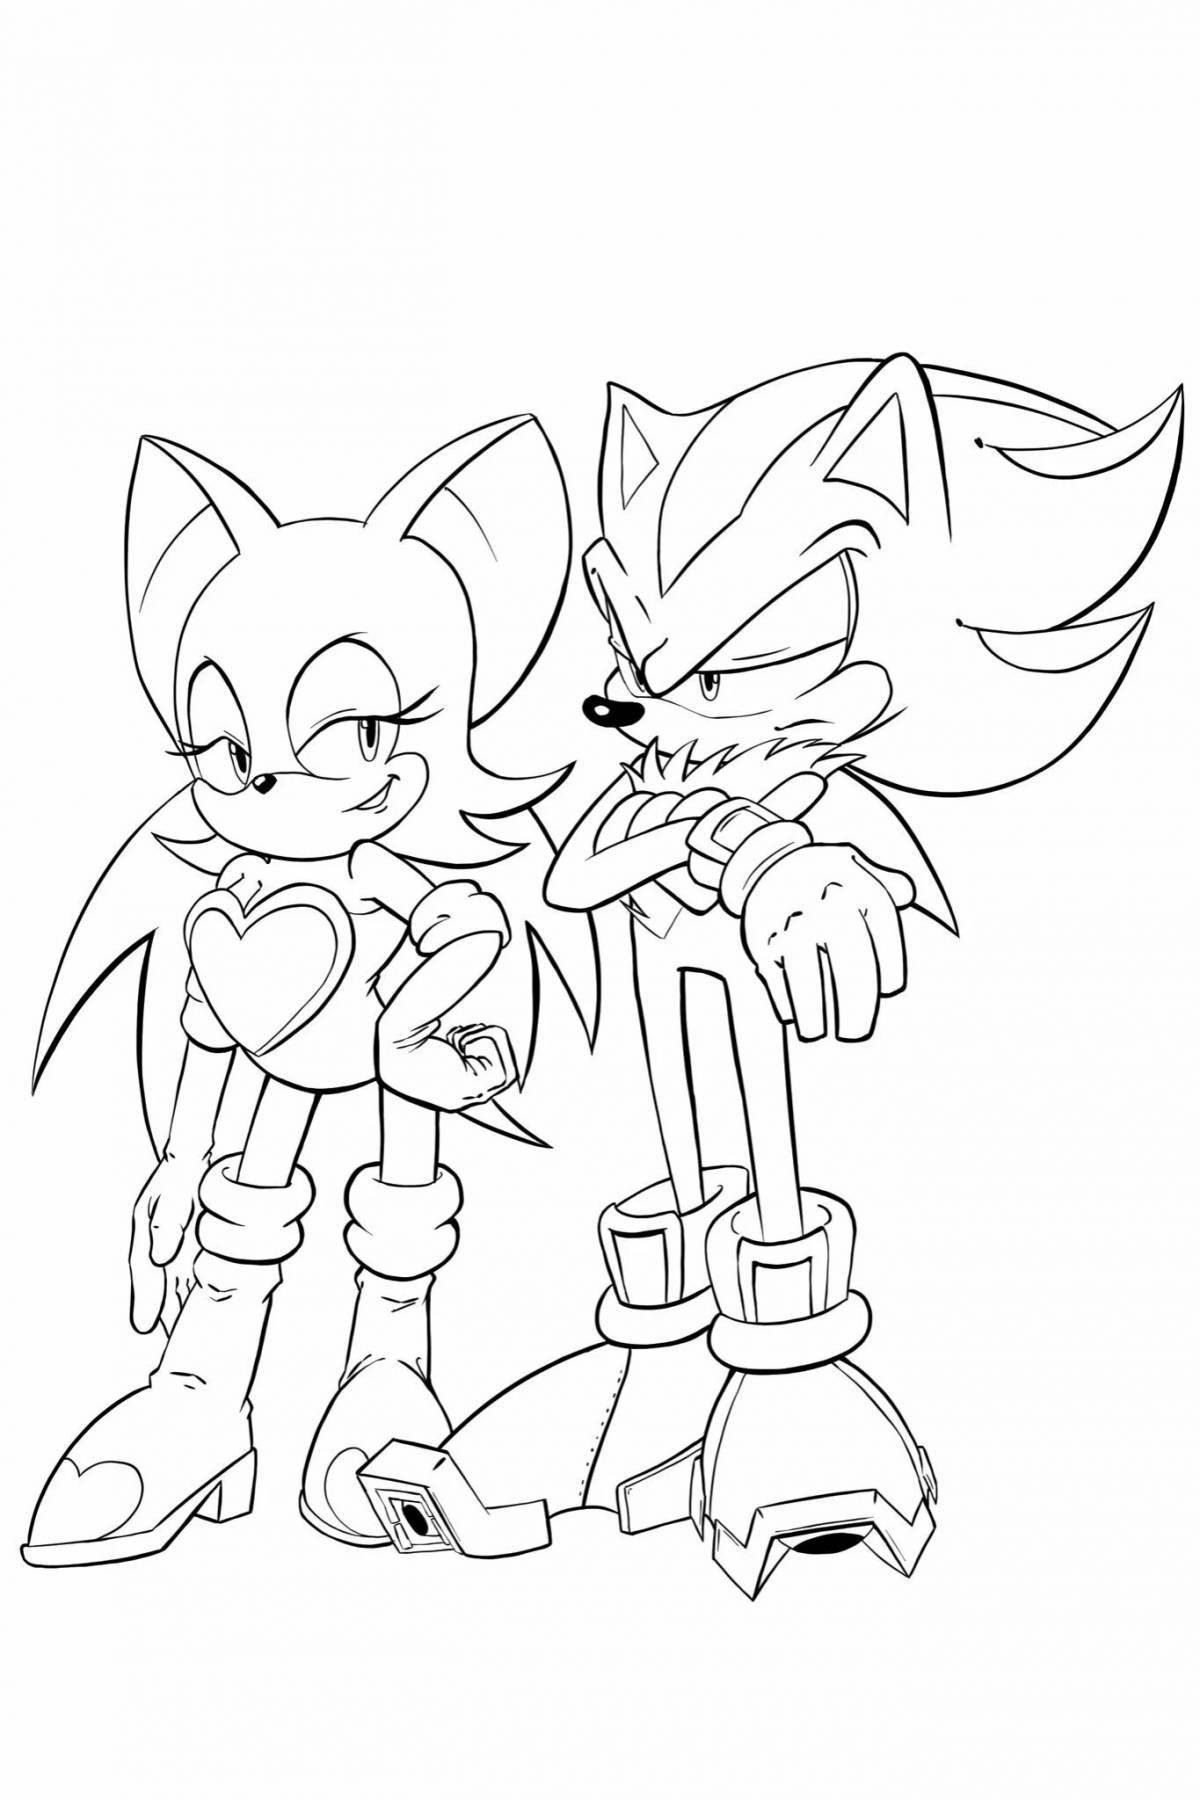 Sonic silver and shadow live coloring